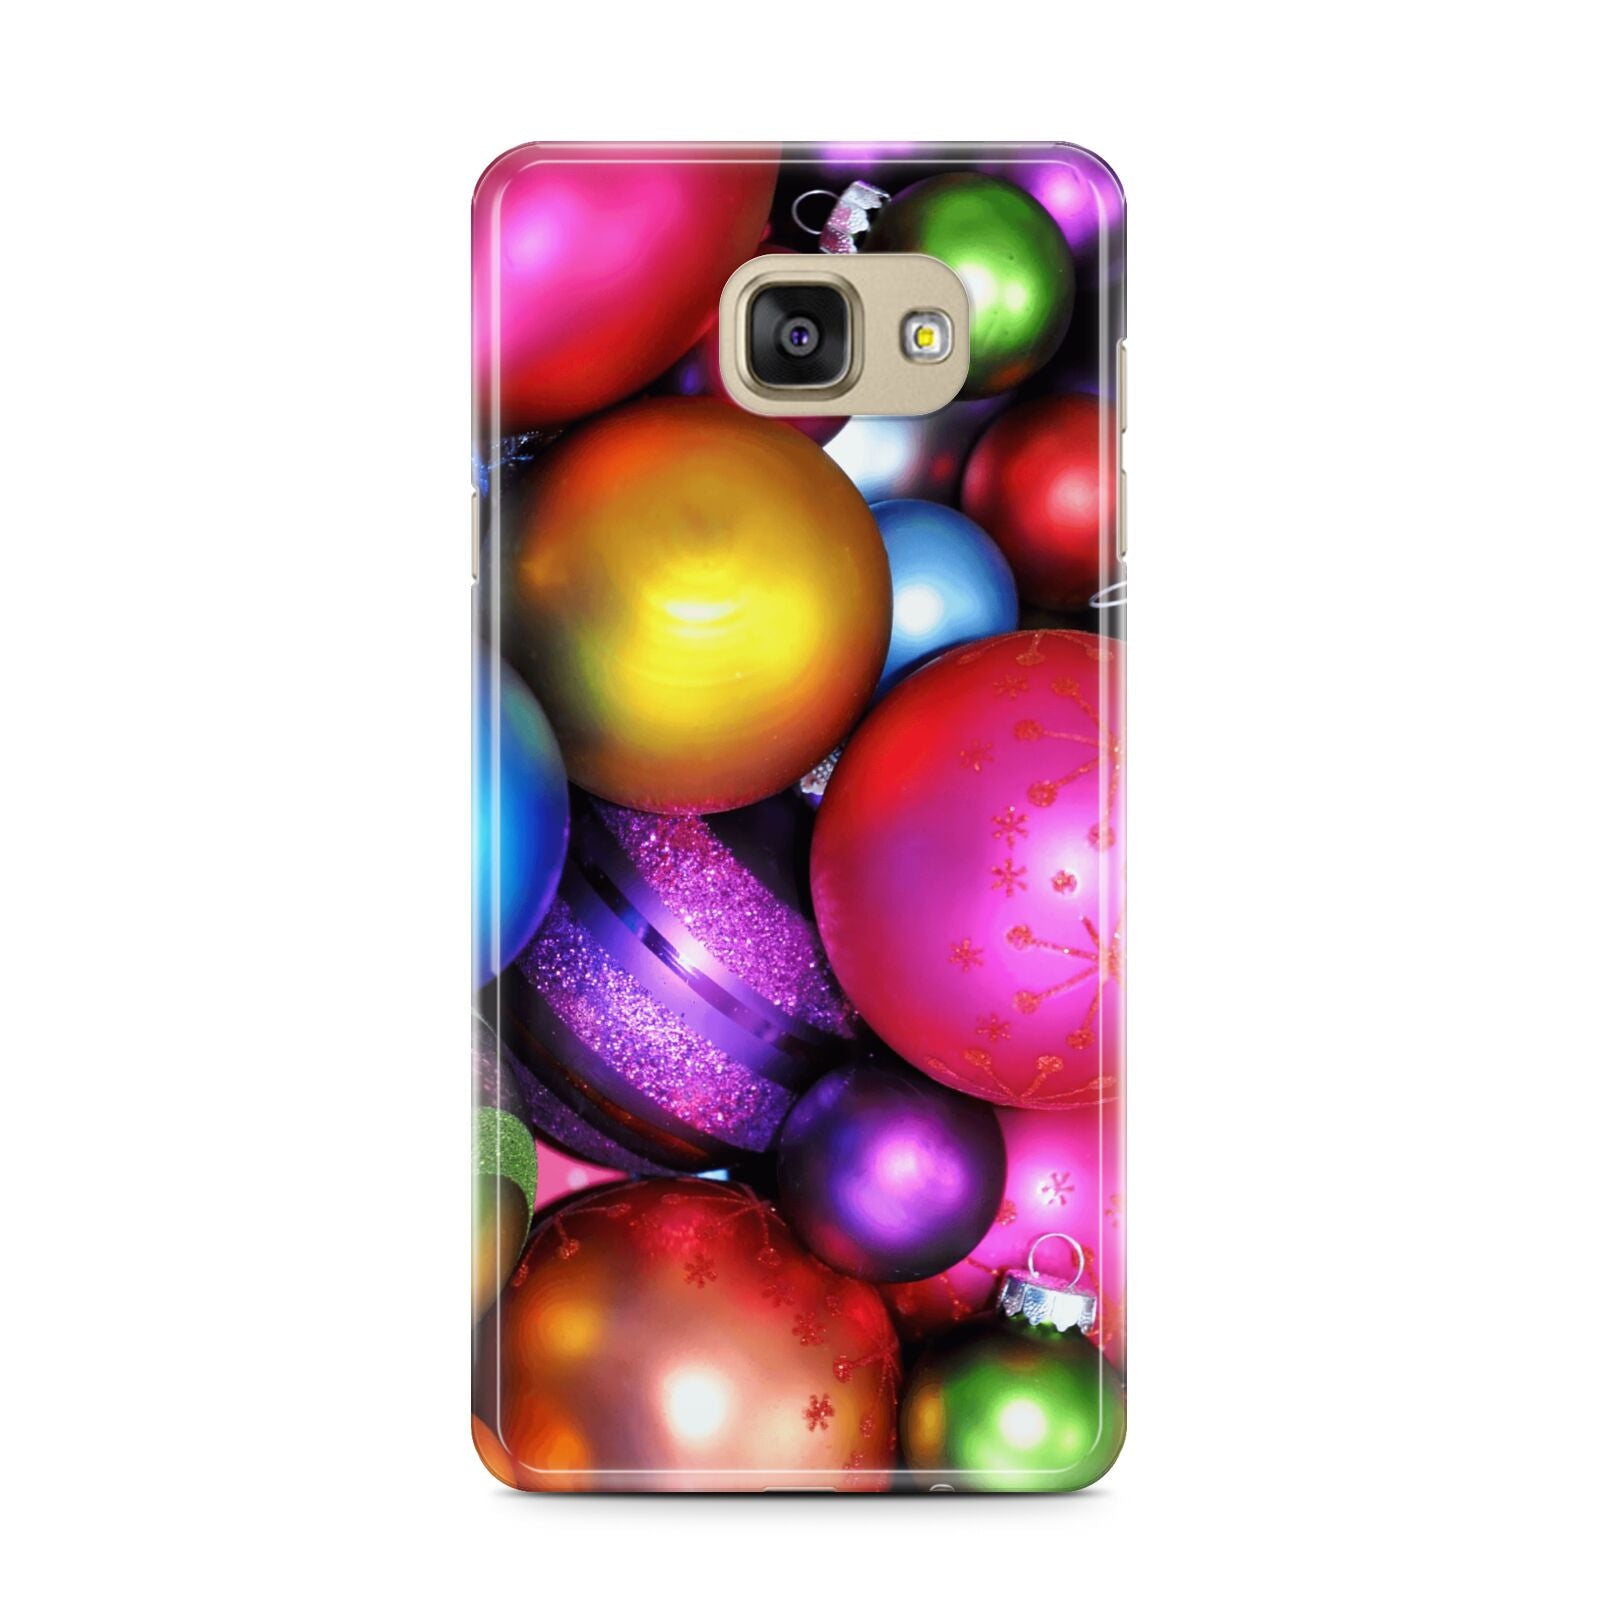 Bauble Samsung Galaxy A7 2016 Case on gold phone